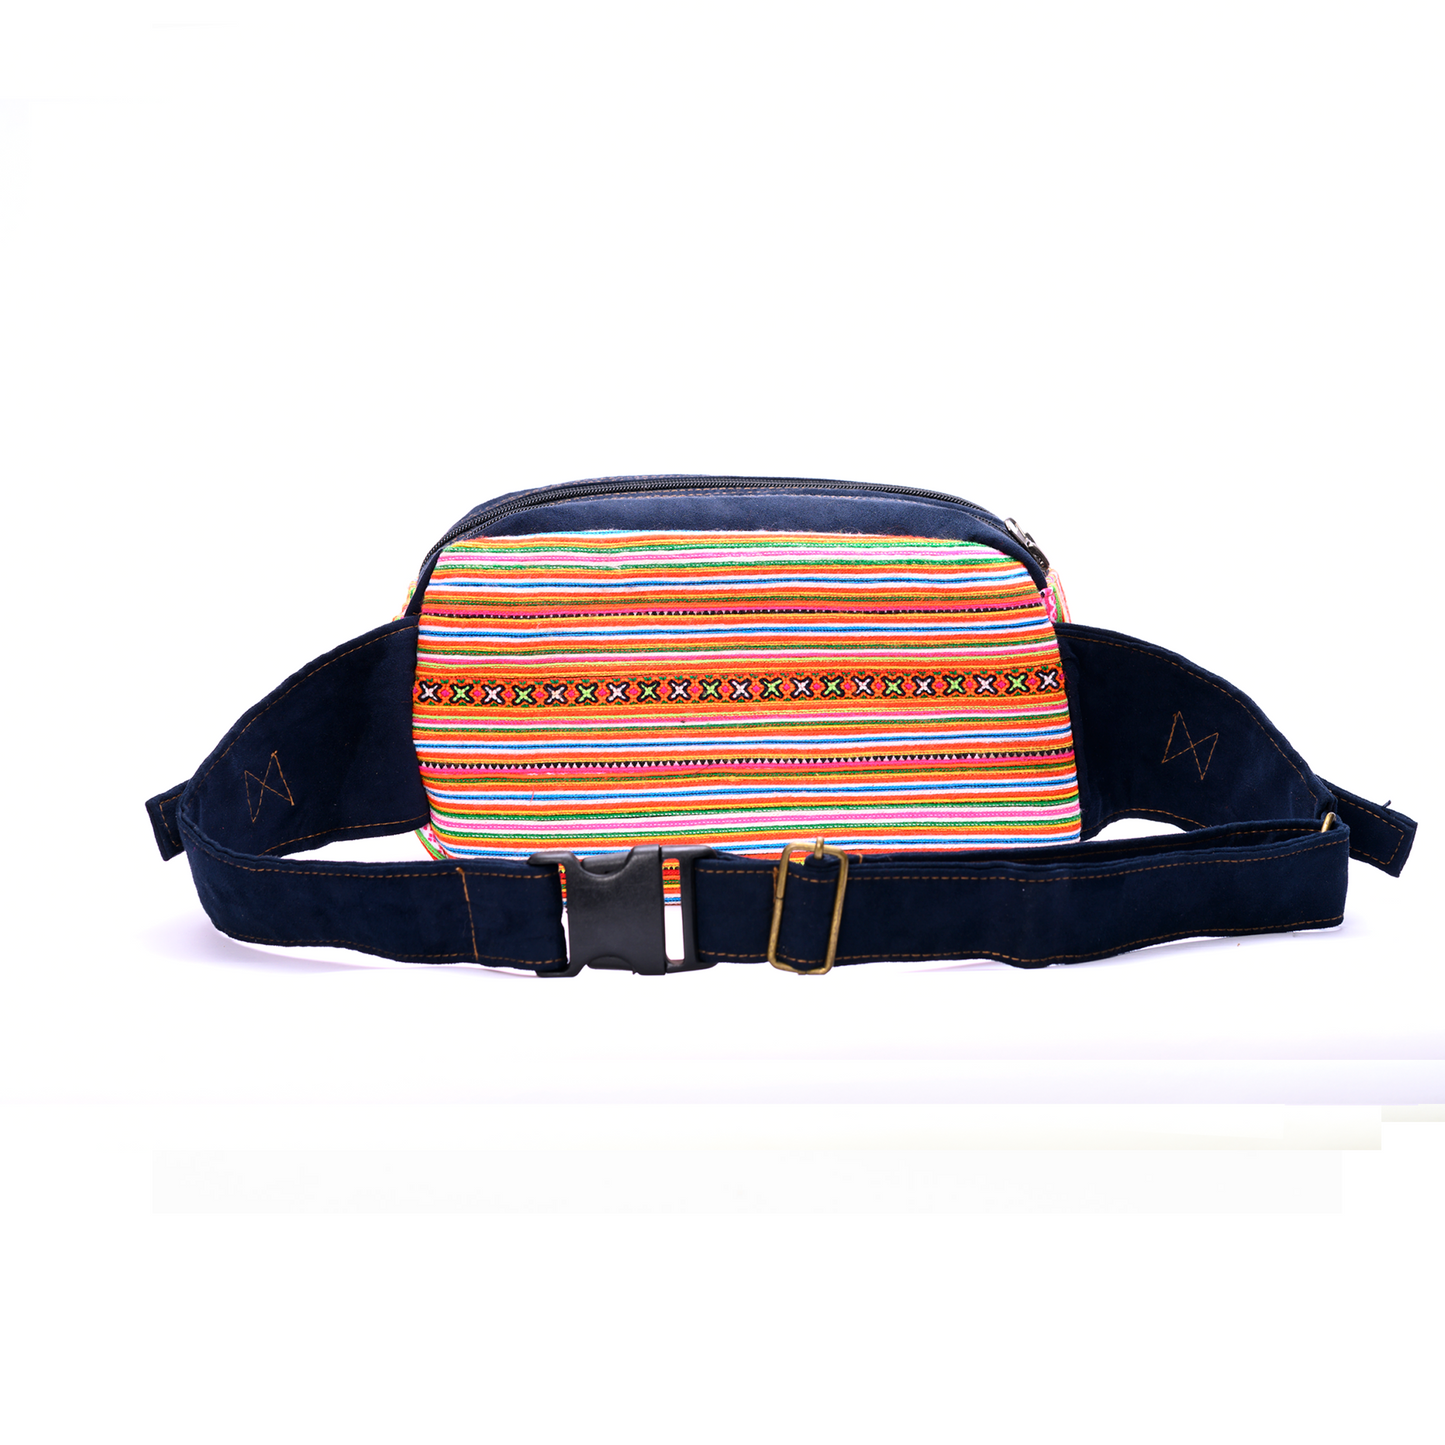 Orange Waist bag, embroidery and faux leather